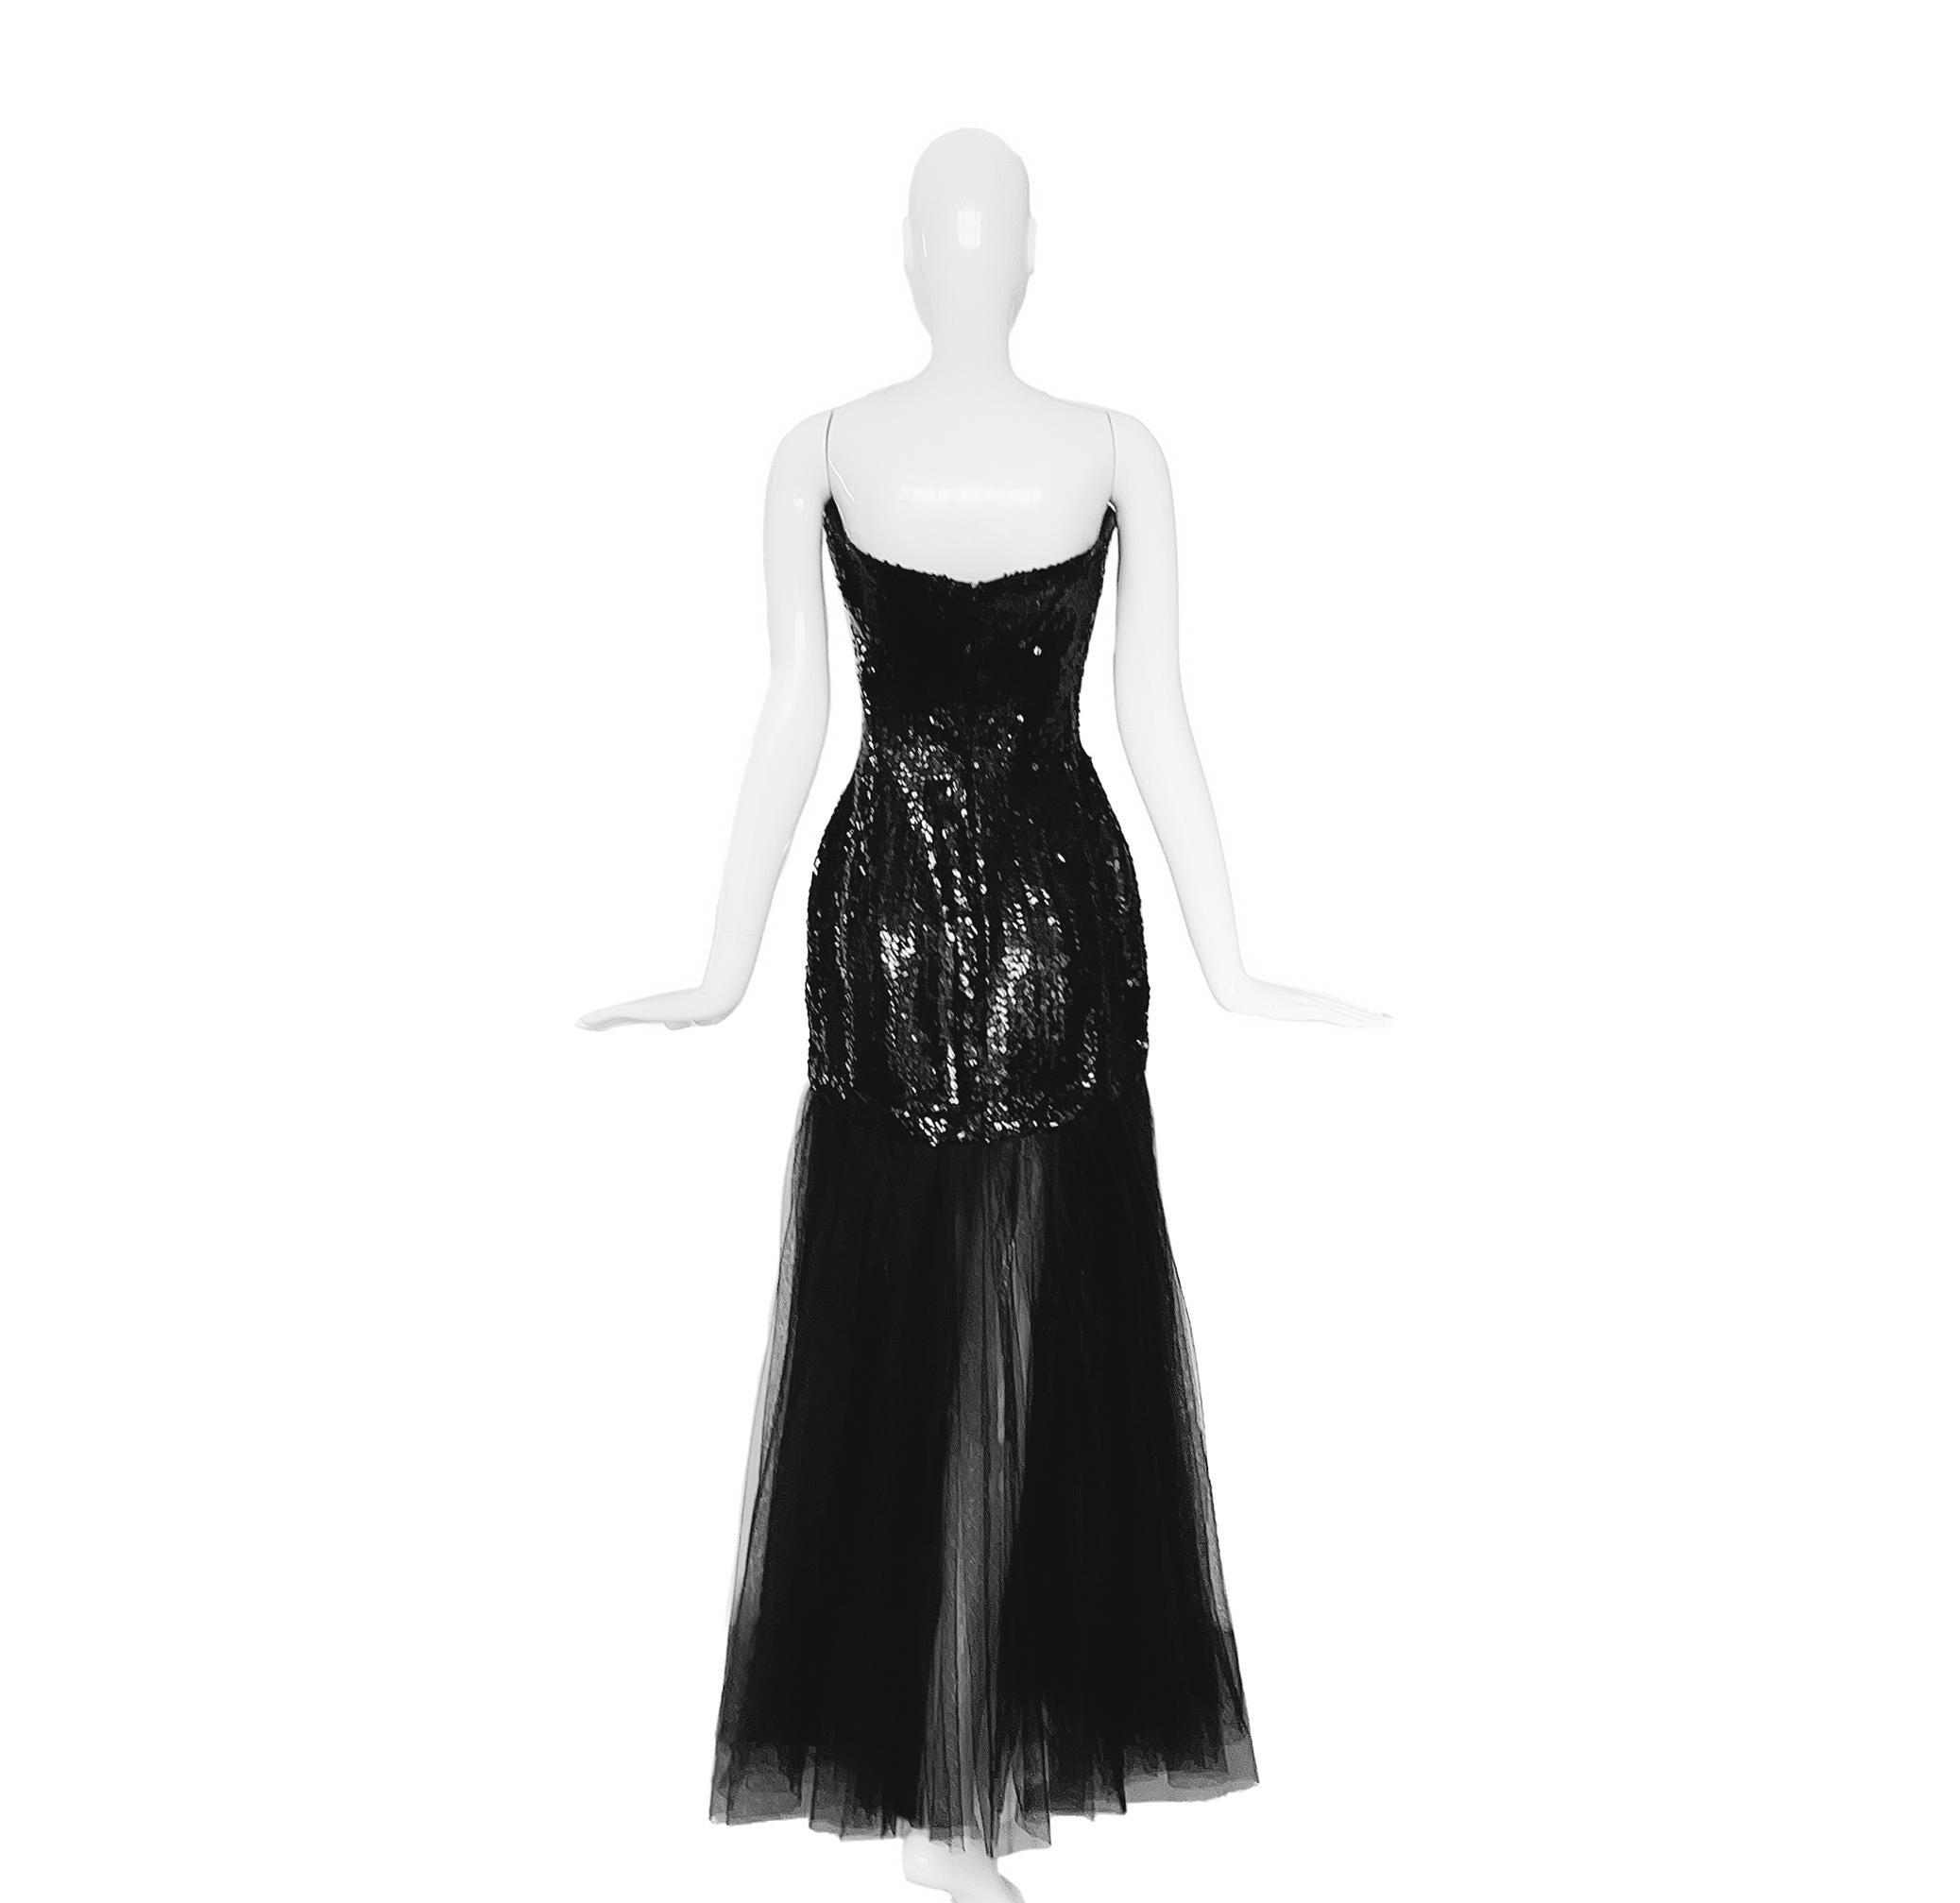 Showstopper Thierry Mugler Dramatic Evening Gown Black Sequin In Good Condition For Sale In Berlin, BE